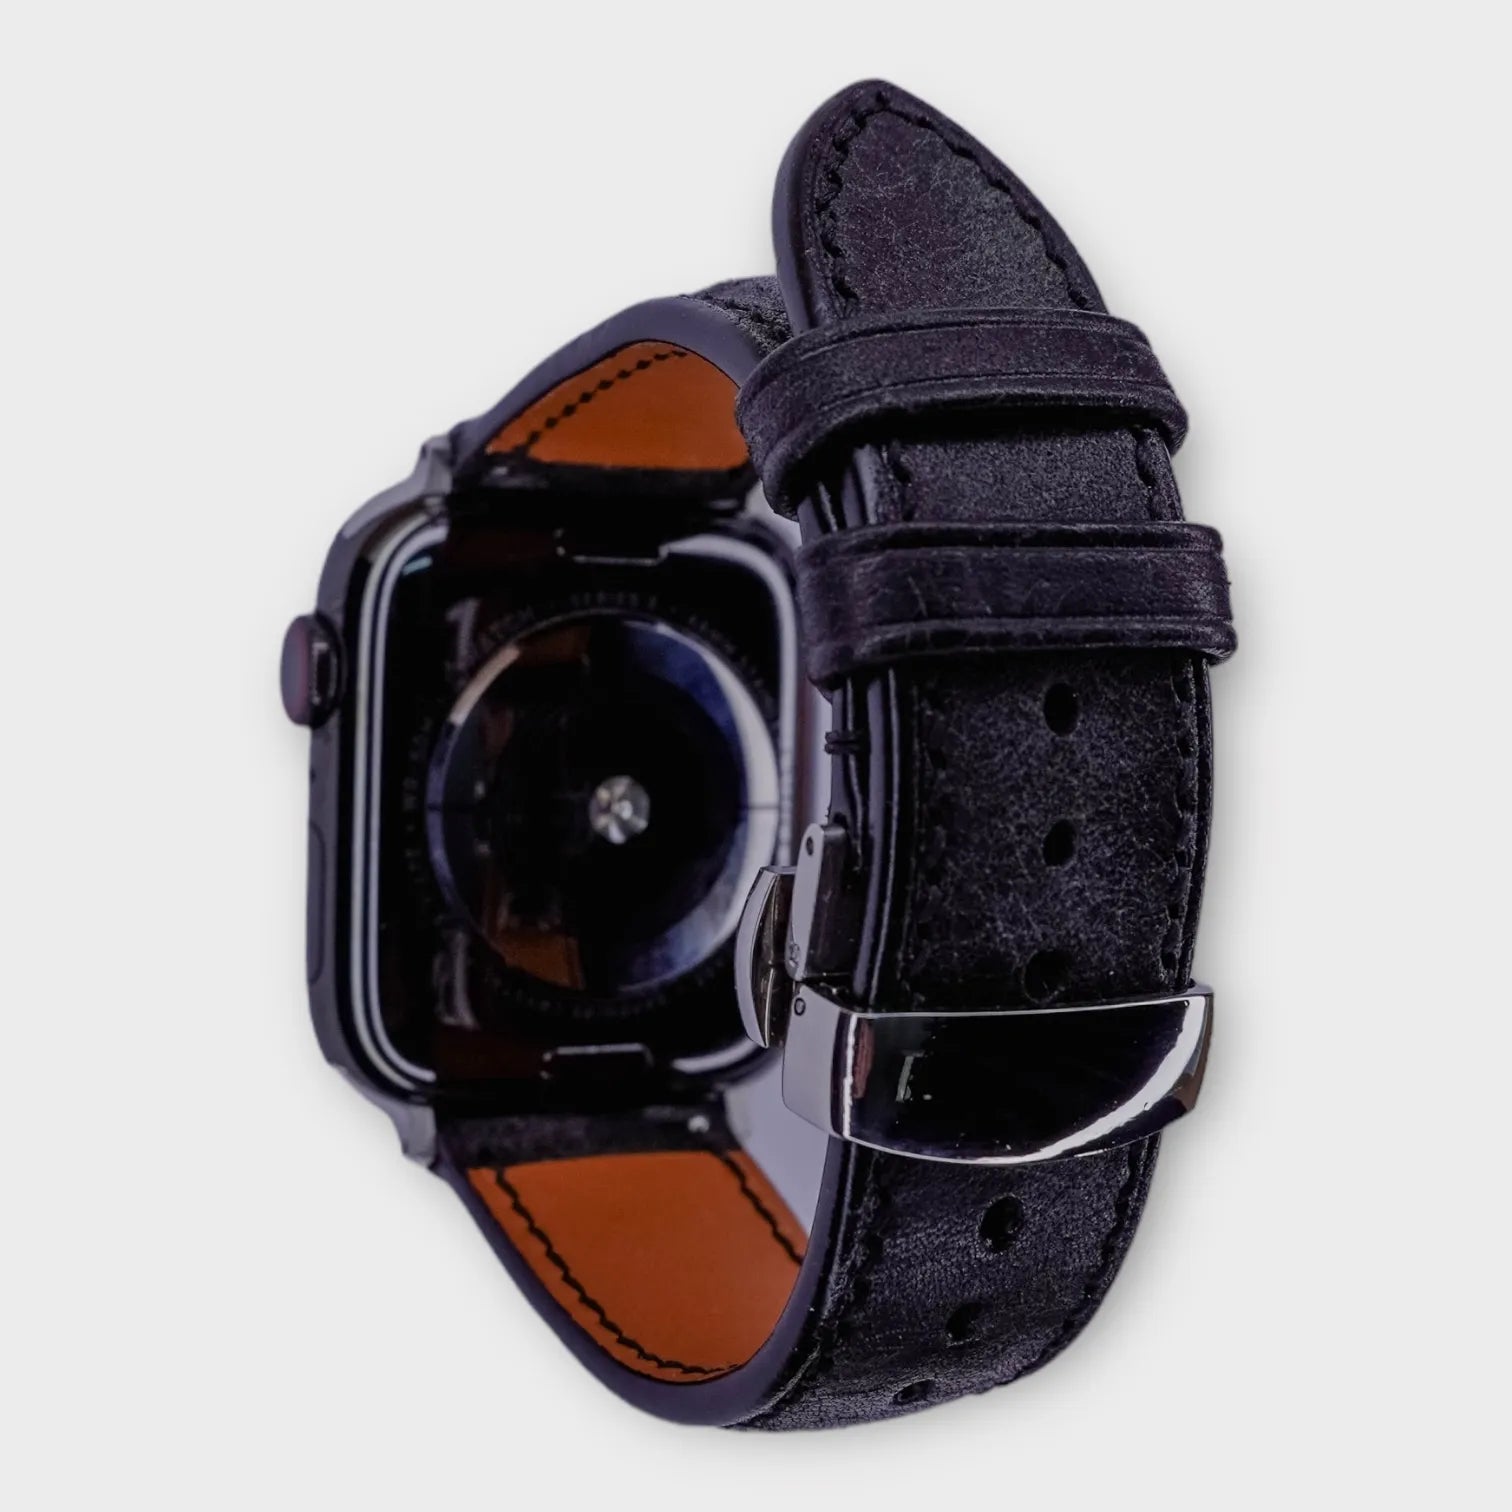 Apple watch leather band crafted from rugged black Pueblo leather for a timeless look.